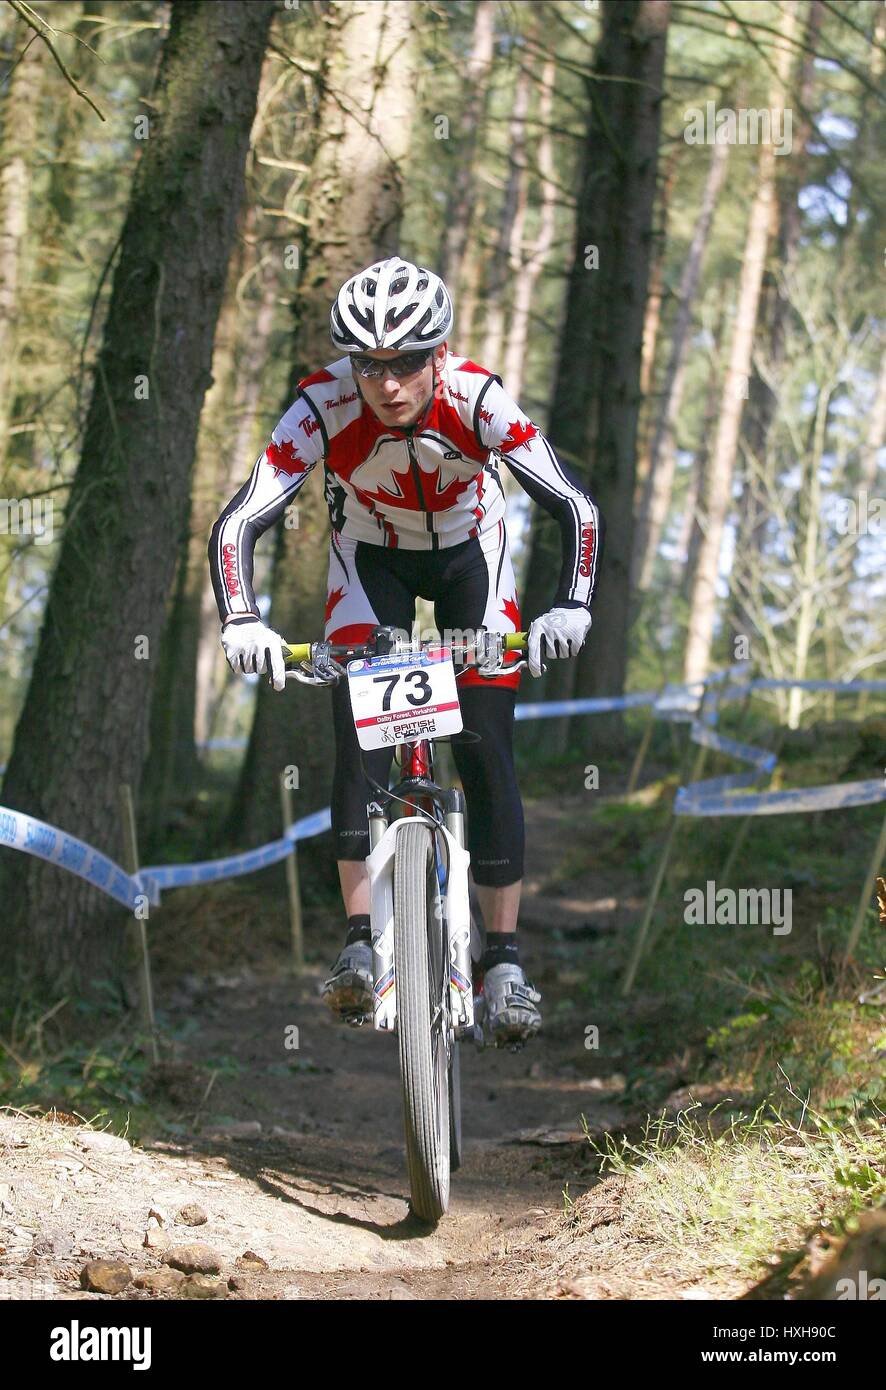 ANDREW WATSON CANADIAN NATIONAL OUTFIT DALBY FOREST YORKSHIRE 24. April 2010 Stockfoto